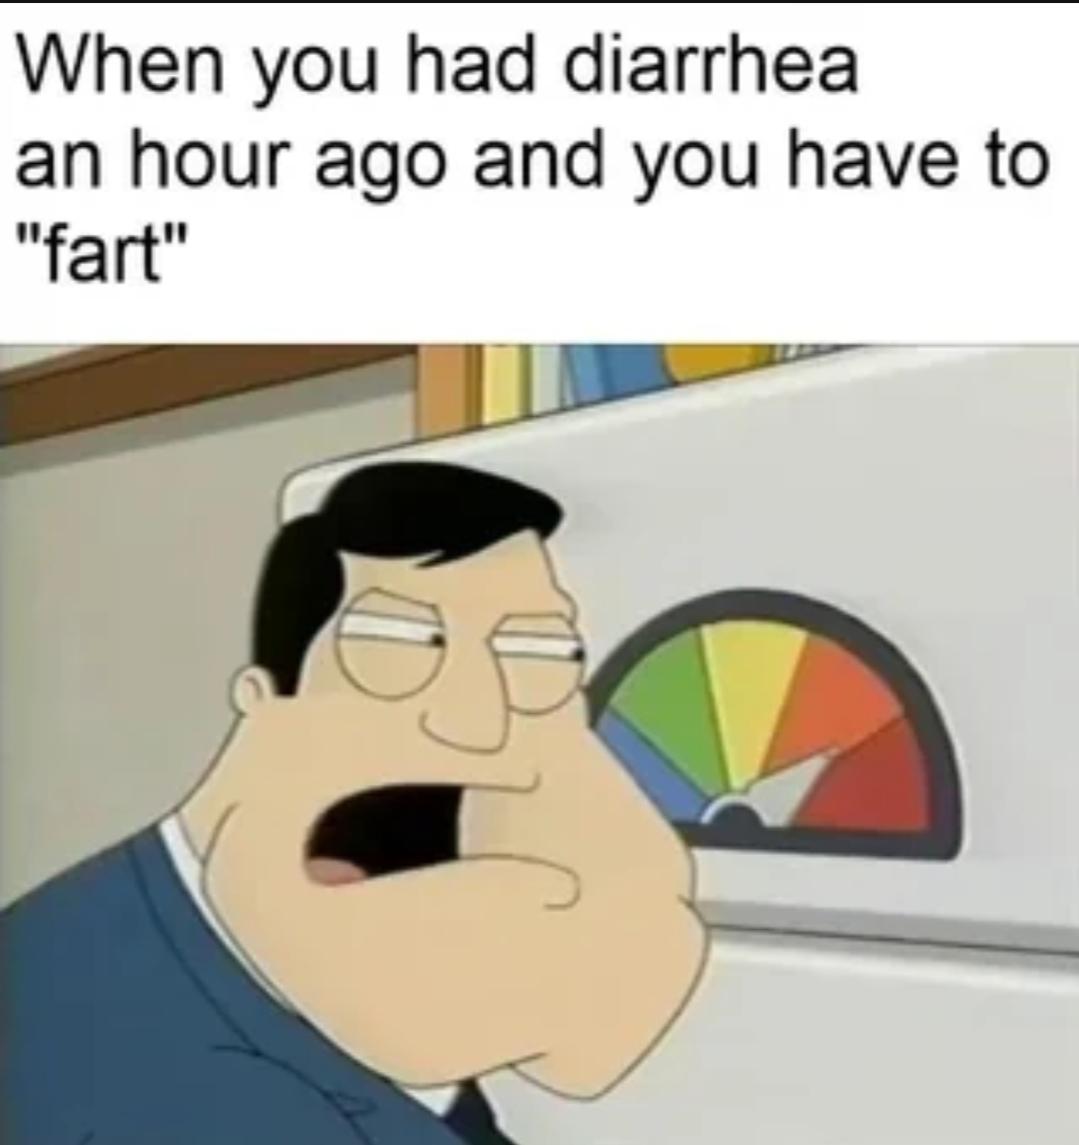 Funny and memes - cartoon - When you had diarrhea an hour ago and you have to "fart"